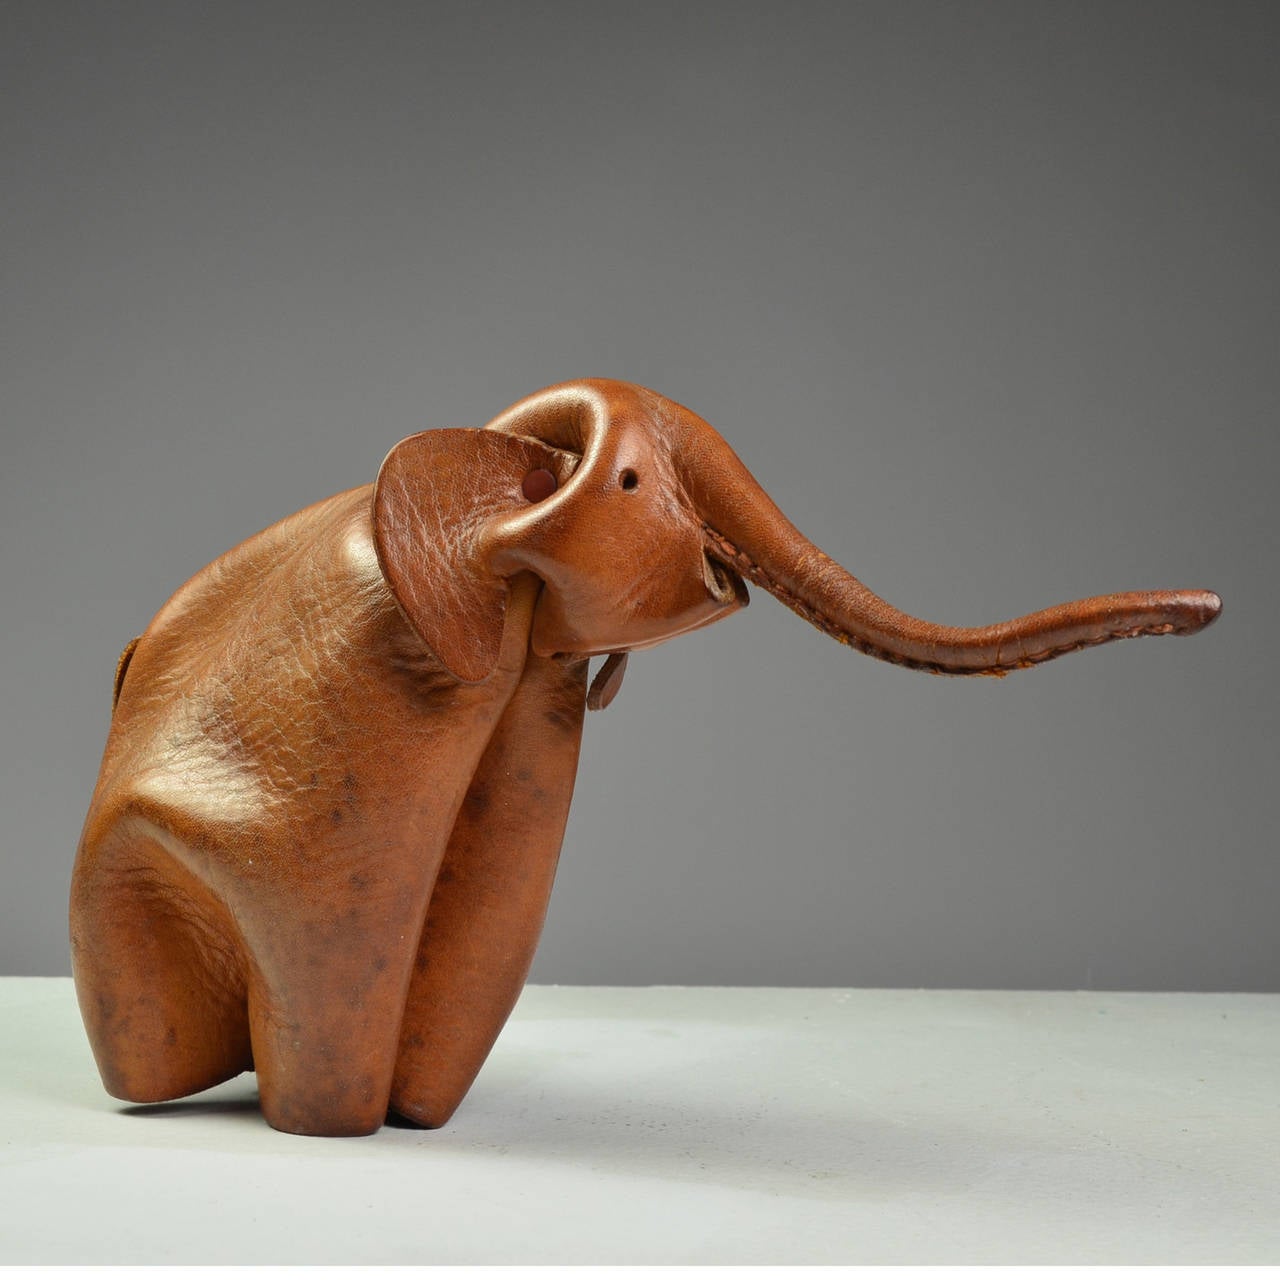 Deru a German company, Makes Beautiful Hand Craft Animals like Origami.
The metal rivet join the folding leather part of the animal, plus the sewing. 
This Elephant is more original because of the distinct trump lift up